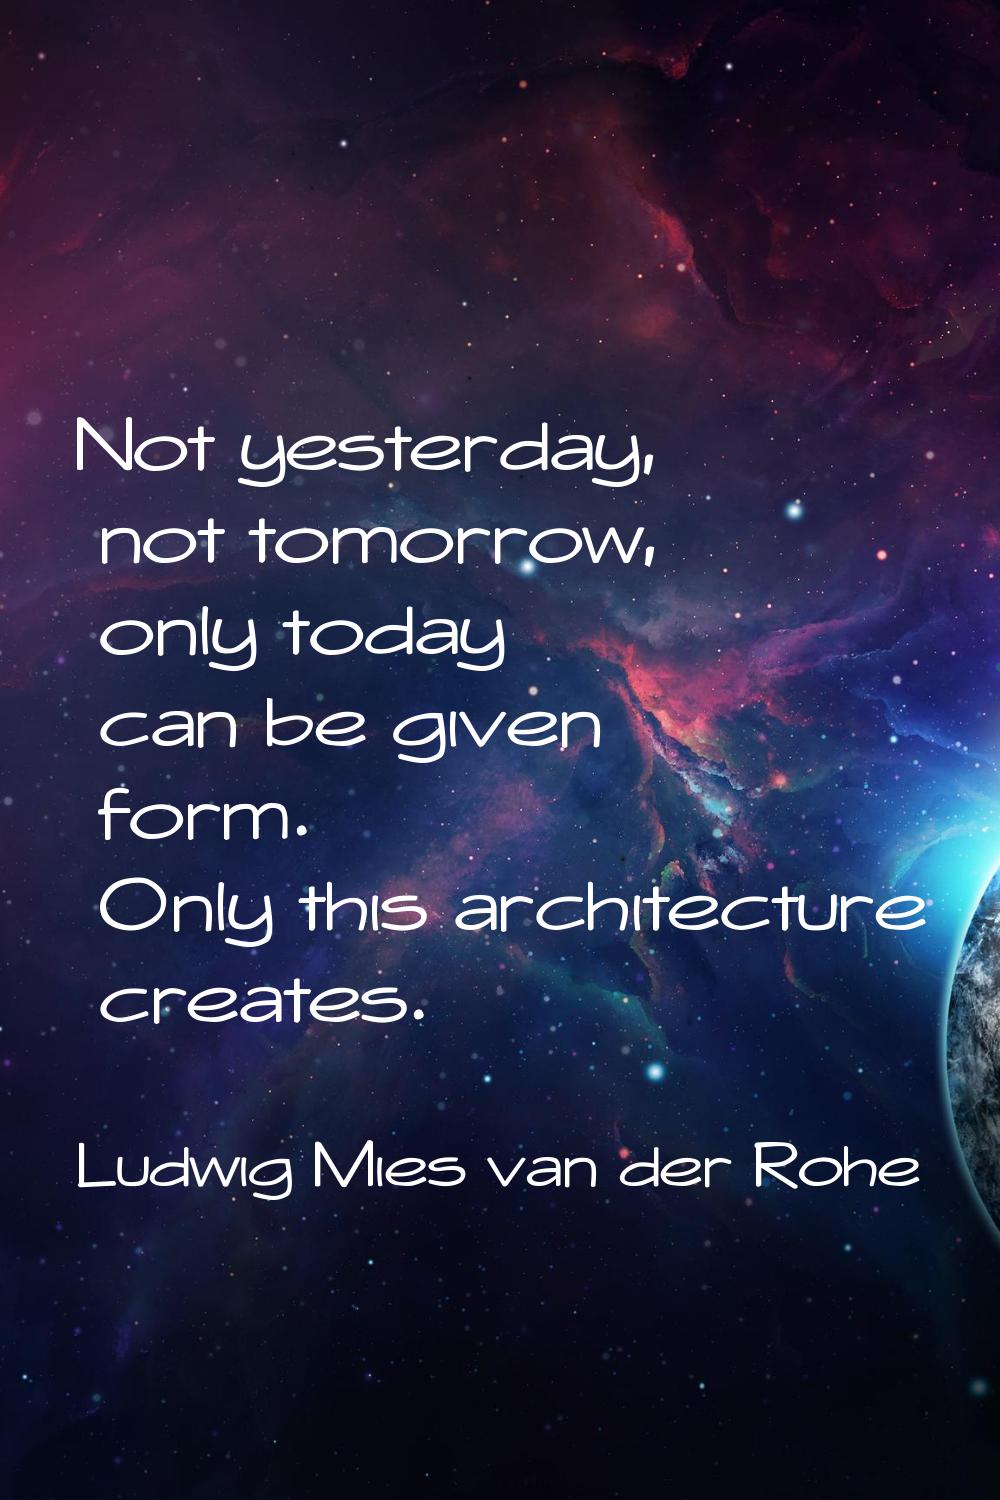 Not yesterday, not tomorrow, only today can be given form. Only this architecture creates.